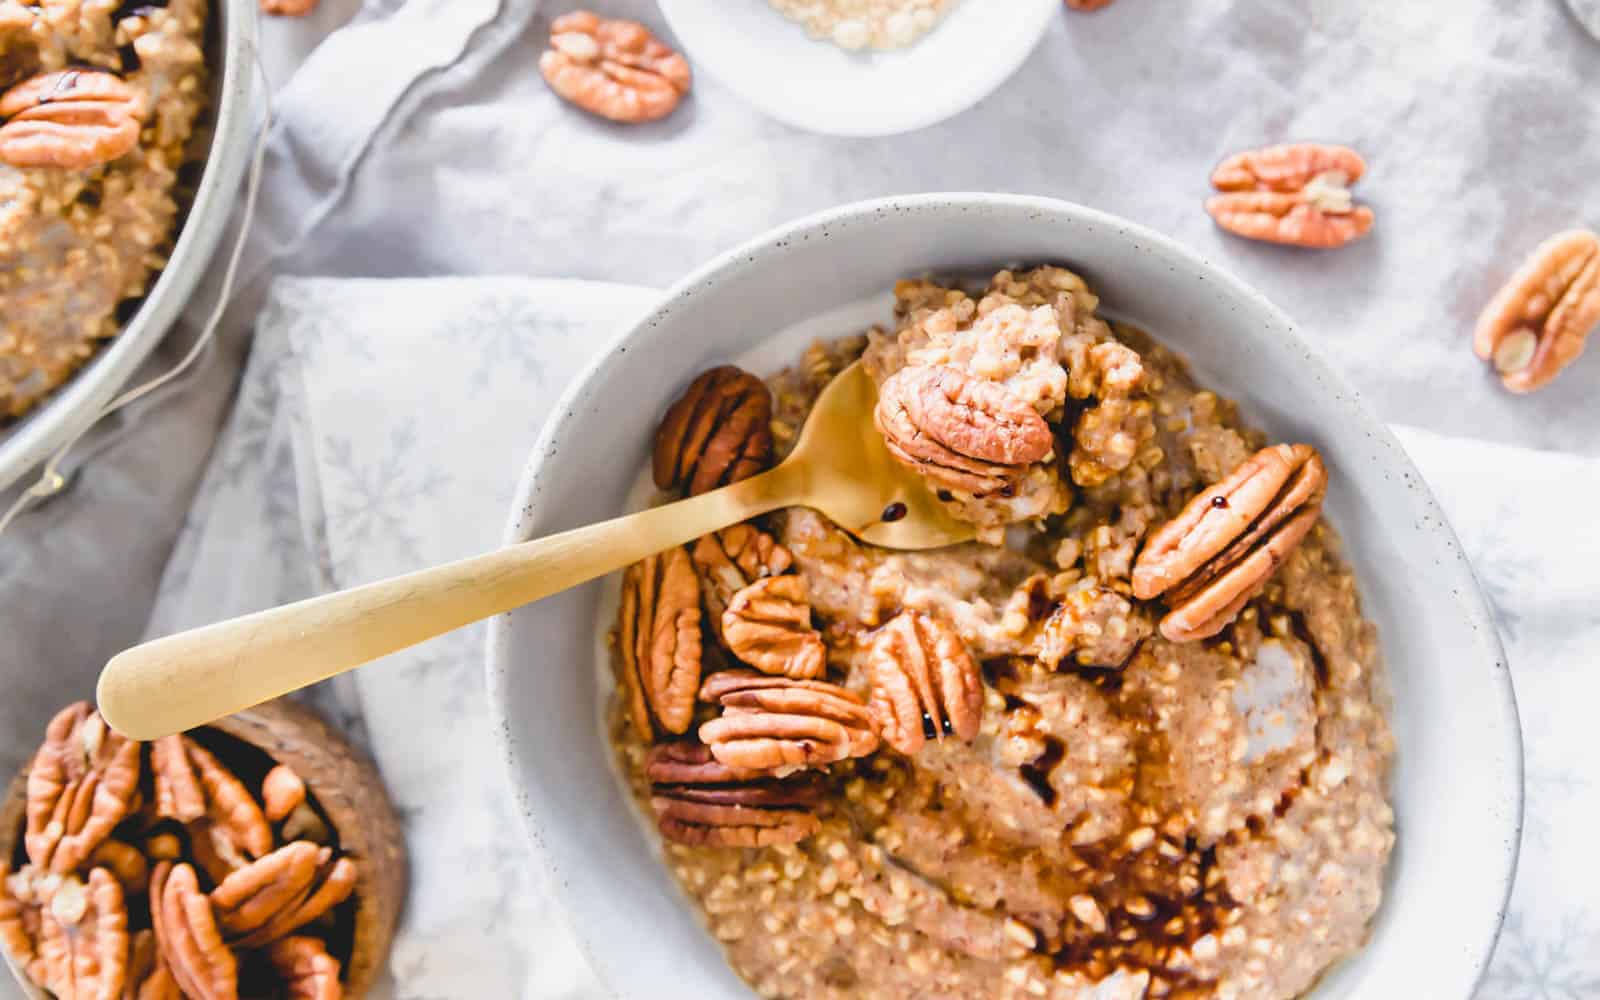 <p>Combining gingerbread spices with steel-cut oats creates a warm, comforting breakfast that embodies the festive spirit of the season, perfect for chilly winter mornings.<br><strong>Get the Recipe: </strong><a href="https://www.runningtothekitchen.com/gingerbread-oatmeal/?utm_source=msn&utm_medium=page&utm_campaign=msn">Gingerbread Oatmeal</a></p>